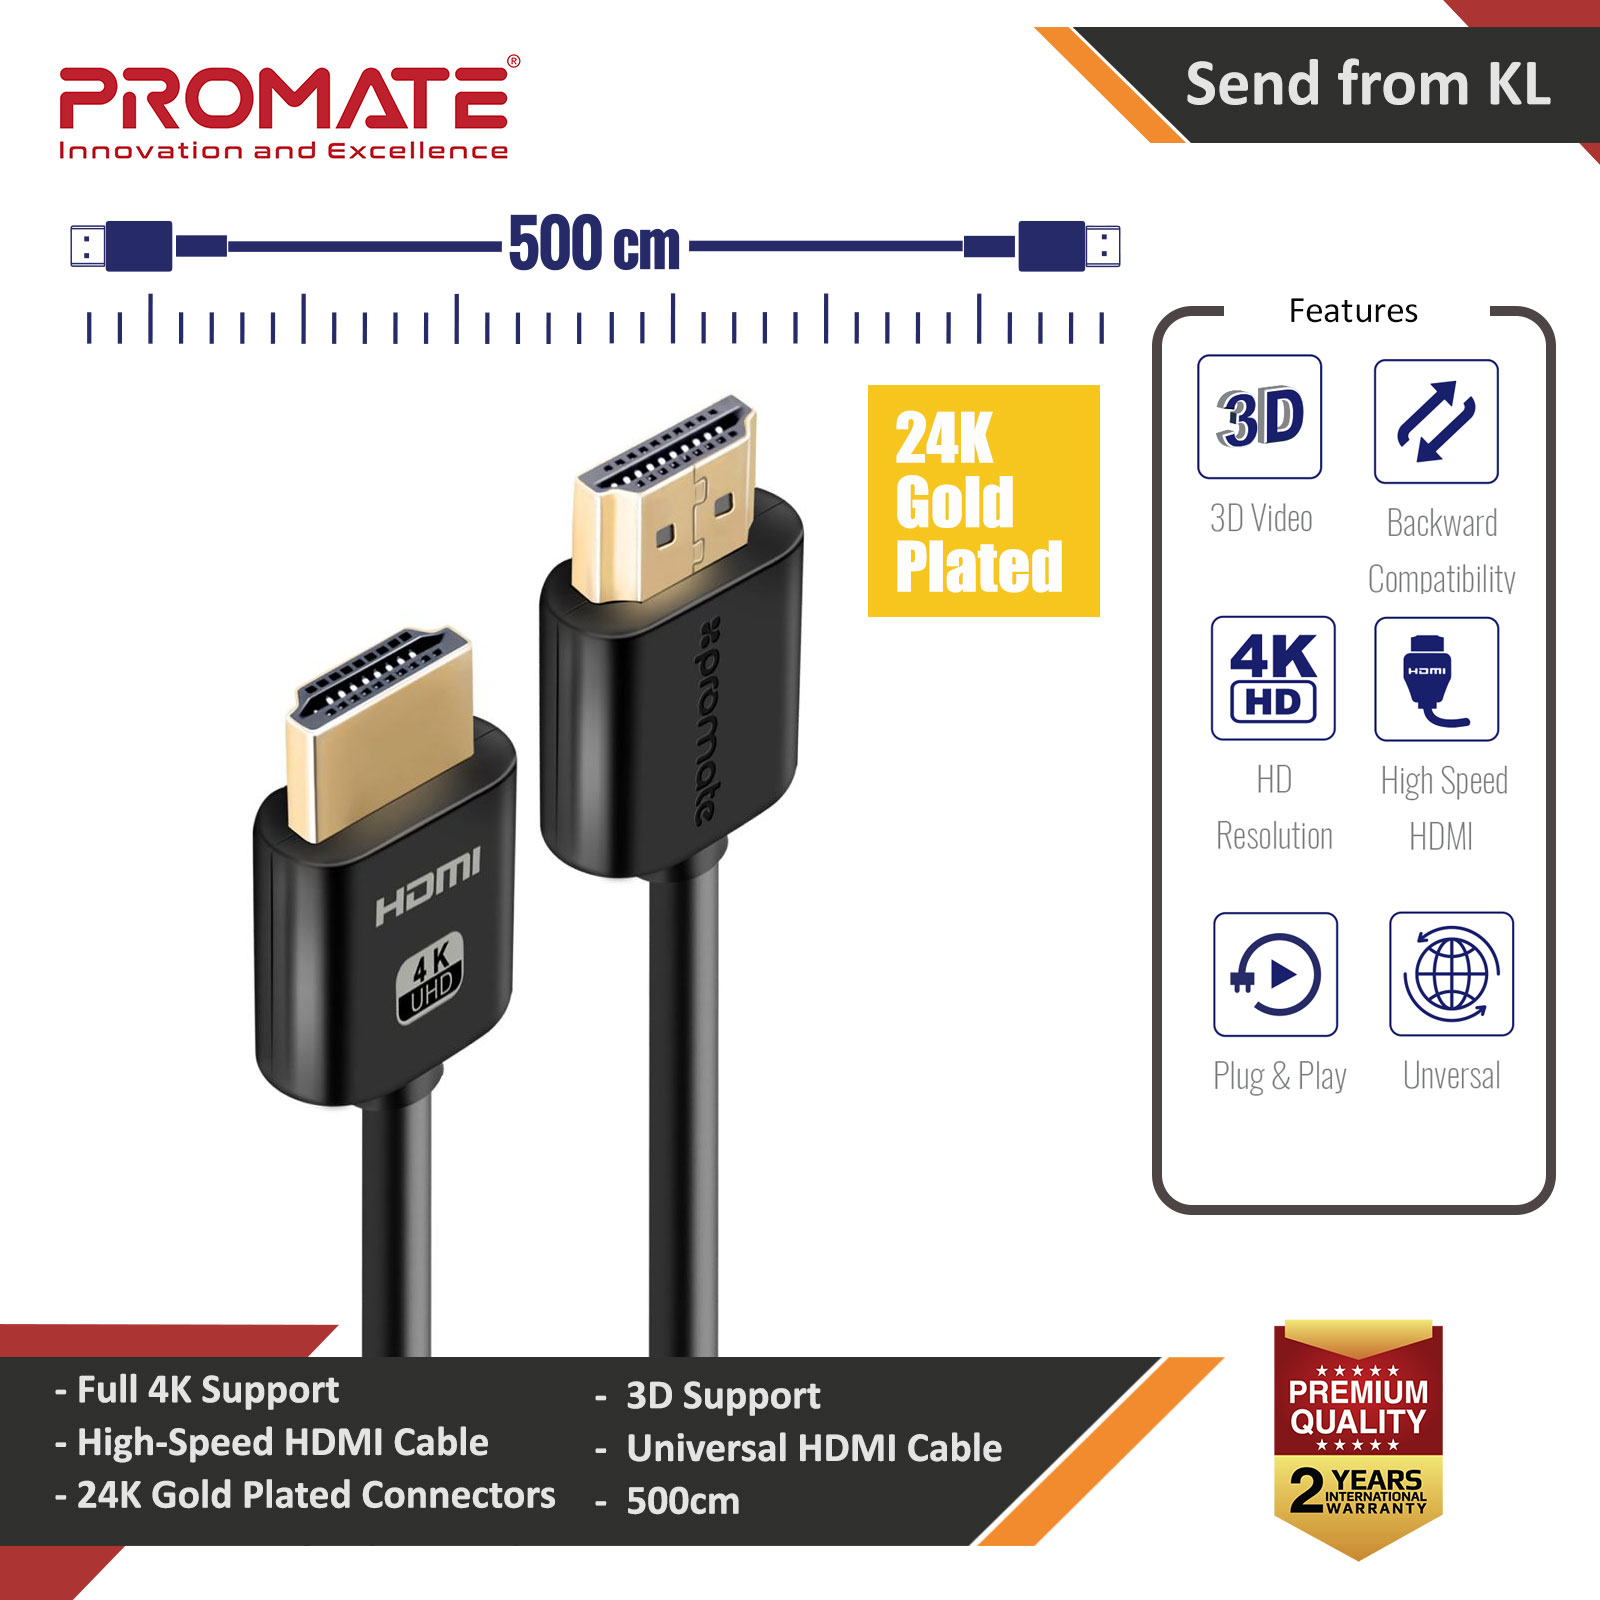 Picture of Promate 4K HDMI Cable High-Speed 5 Meter HDMI Cable with 24K Gold Plated Connector and Ethernet 3D Video Support for HDTV Projectors Computers LED TV and Game consoles 500cm ProLink4K2-500